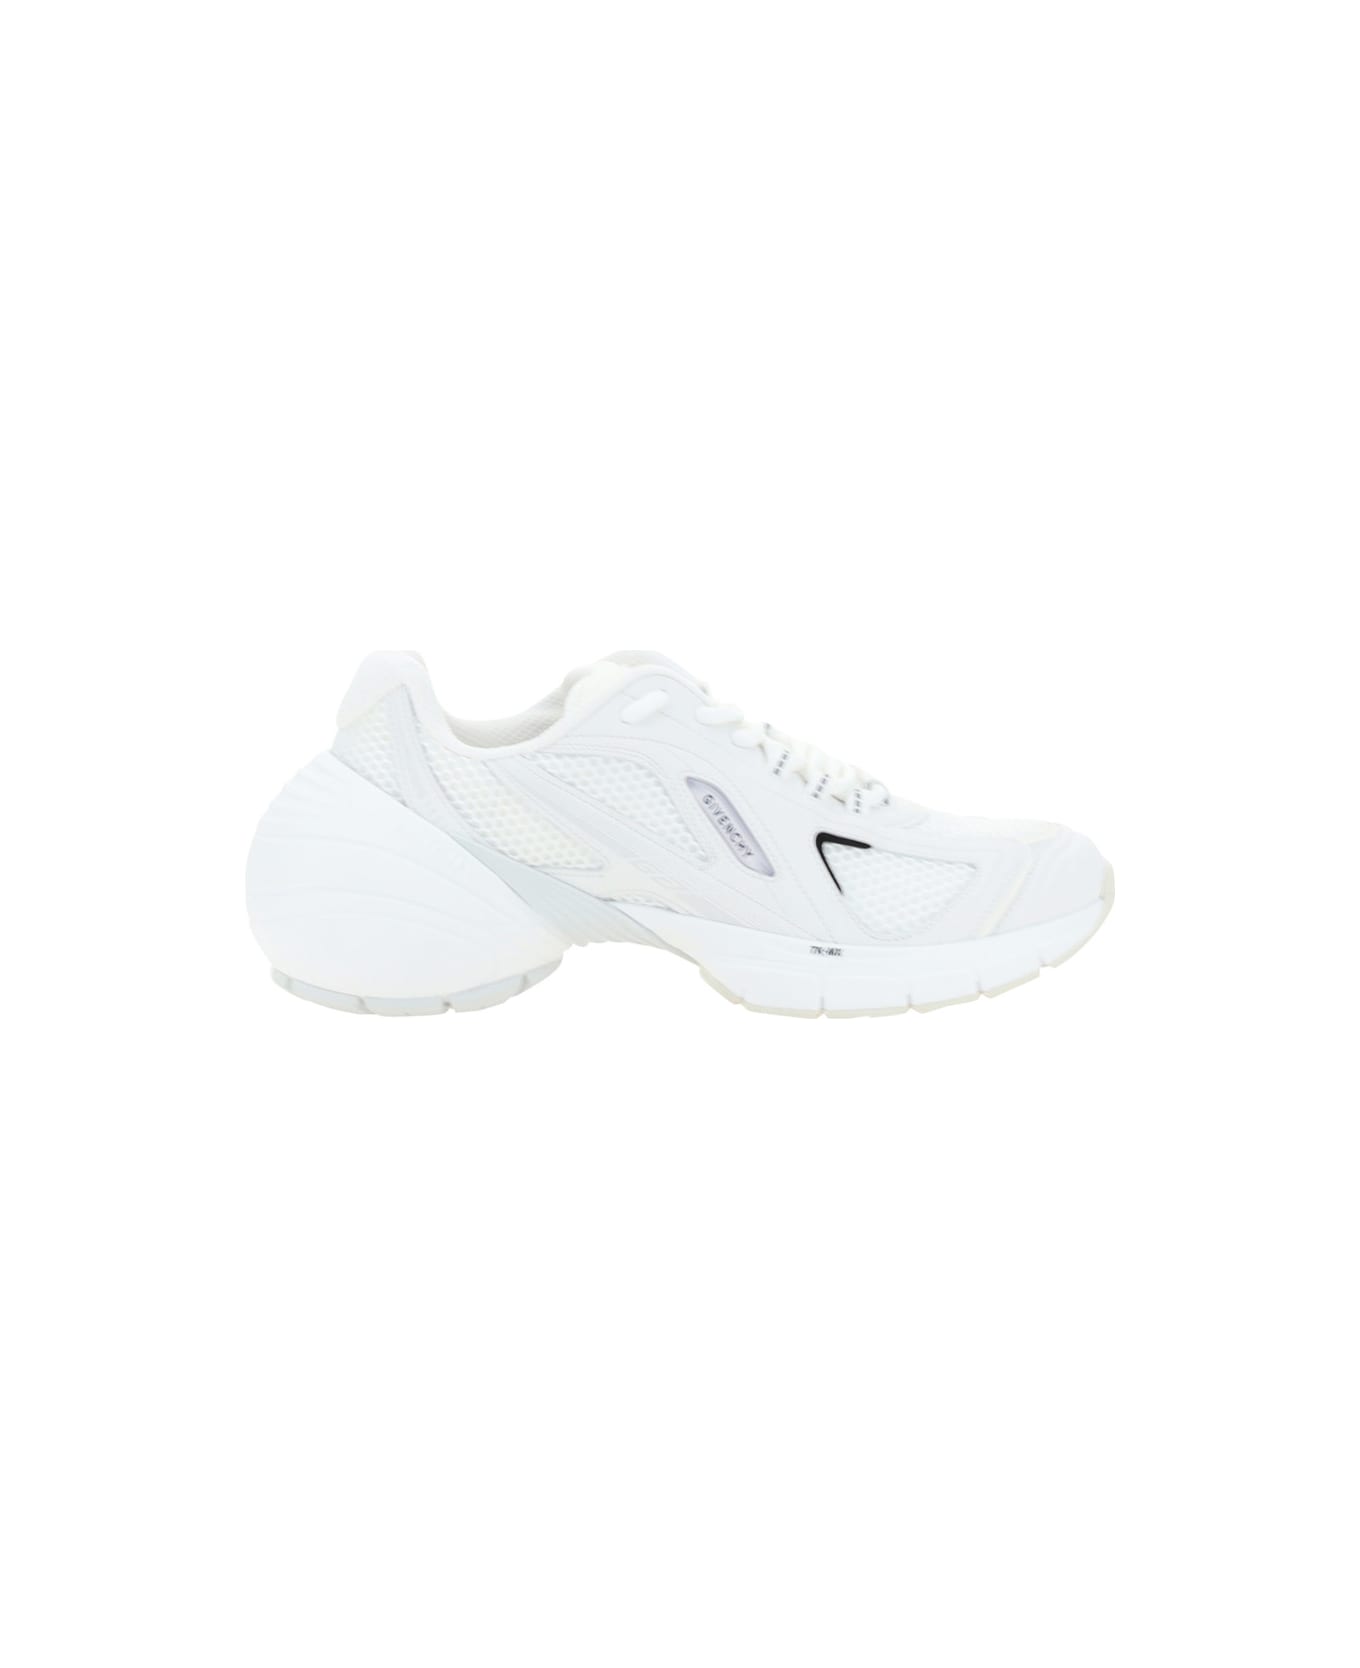 Givenchy Tk-mx Runner Sneakers - WHITE